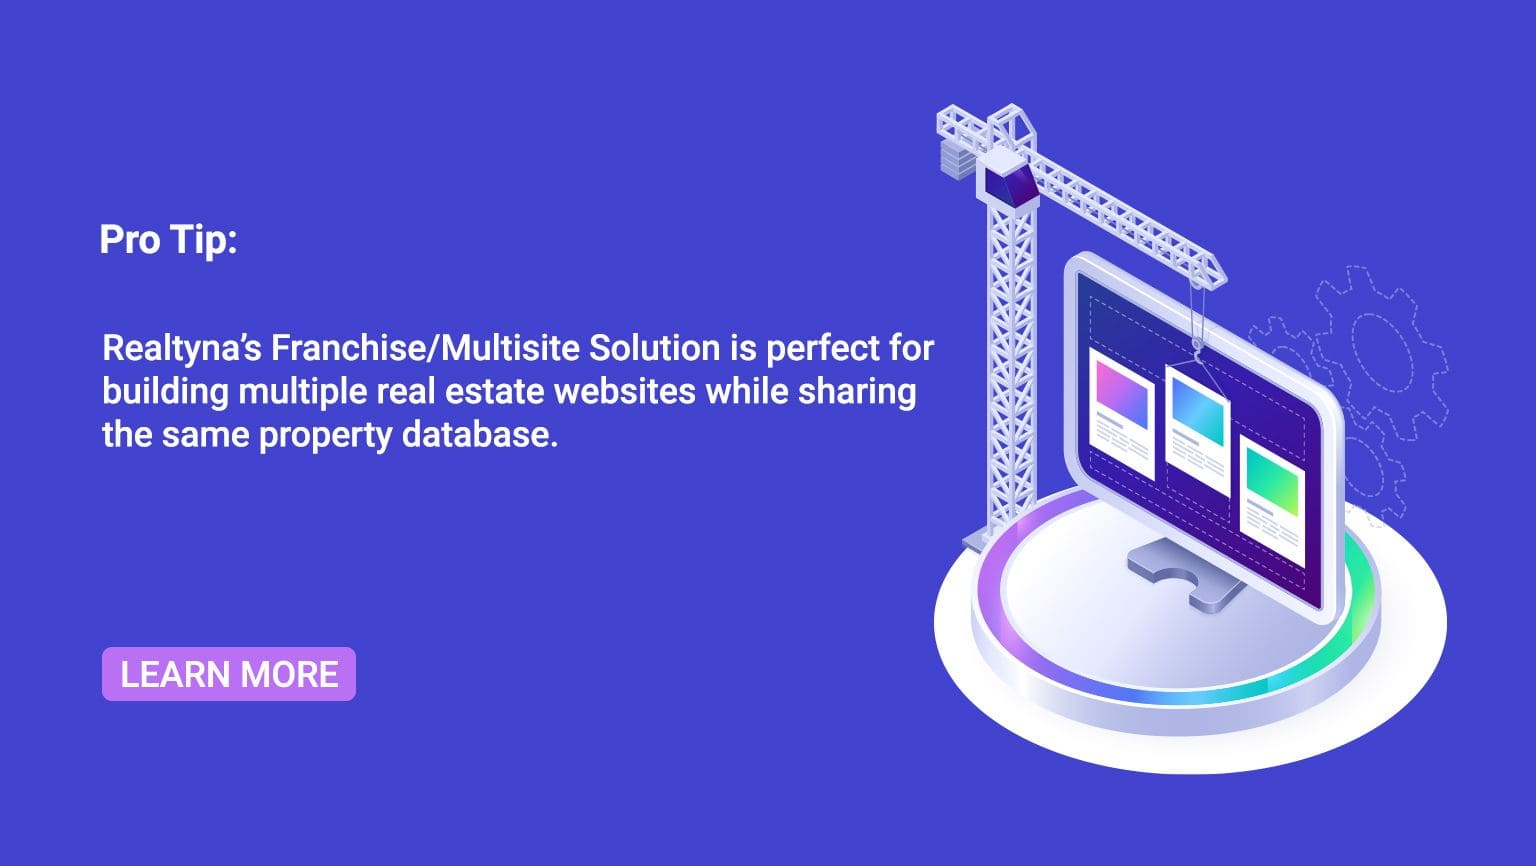 Pro-tip: Realtyna’s Franchise/Multisite Solution is perfect for building multiple real estate websites while sharing the same property database. 